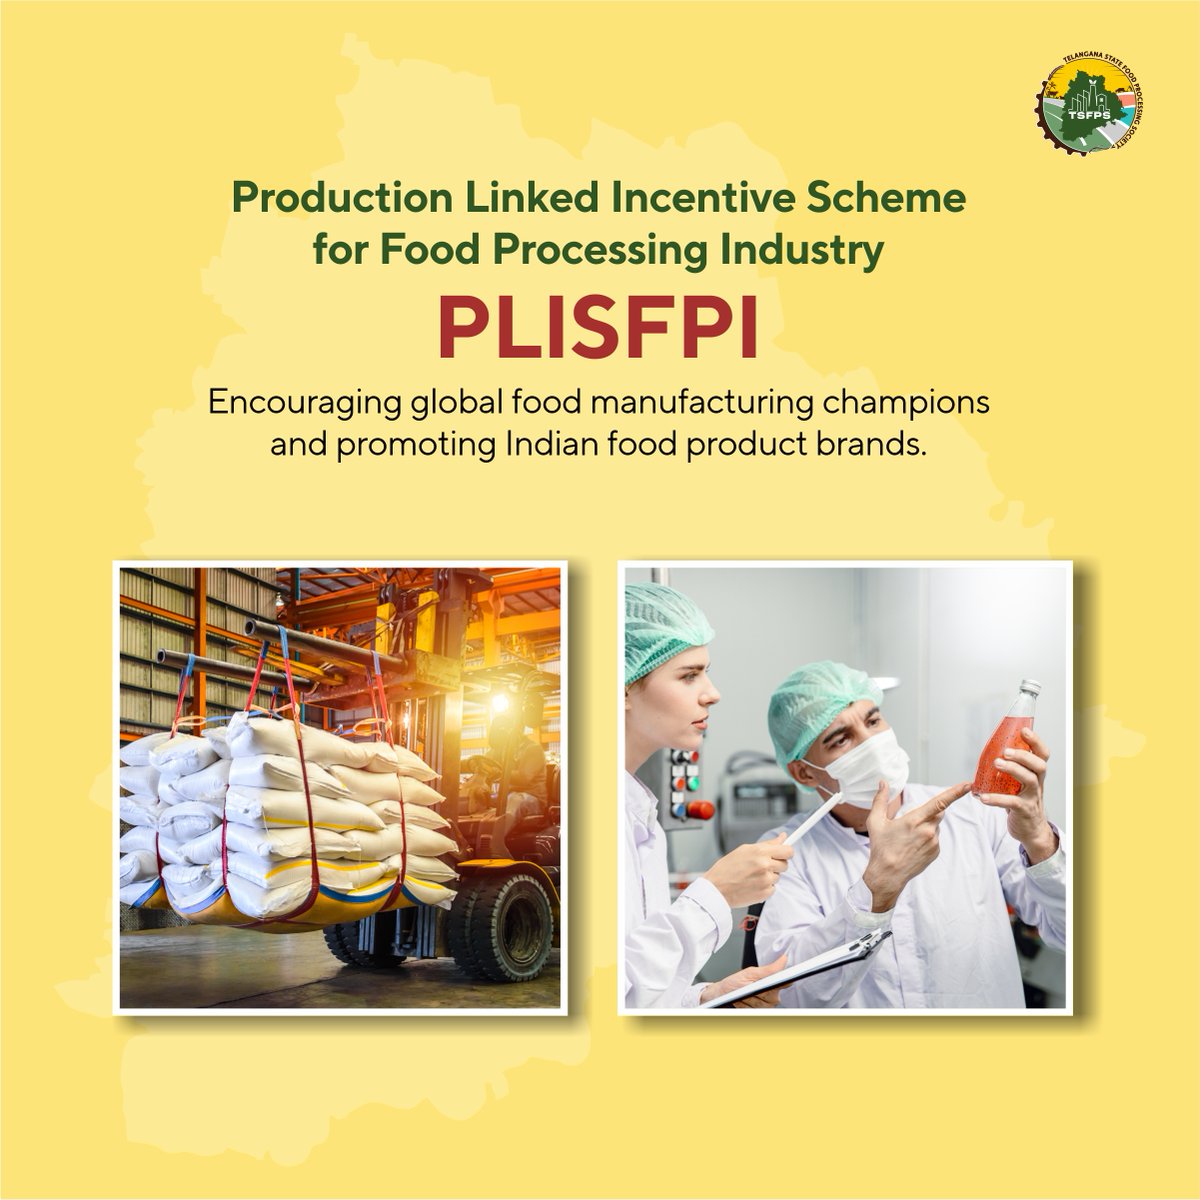 #TSFPS provides support and fosters growth in the food processing industry via these schemes. Major ones include, #PMFME, #PMKSY and #PLISFPI.

#FoodProcessing #Telangana #Hyderabad #MakeInTelangana #HappeningInTelangana #InvestInTelangana #TelanganaFacts